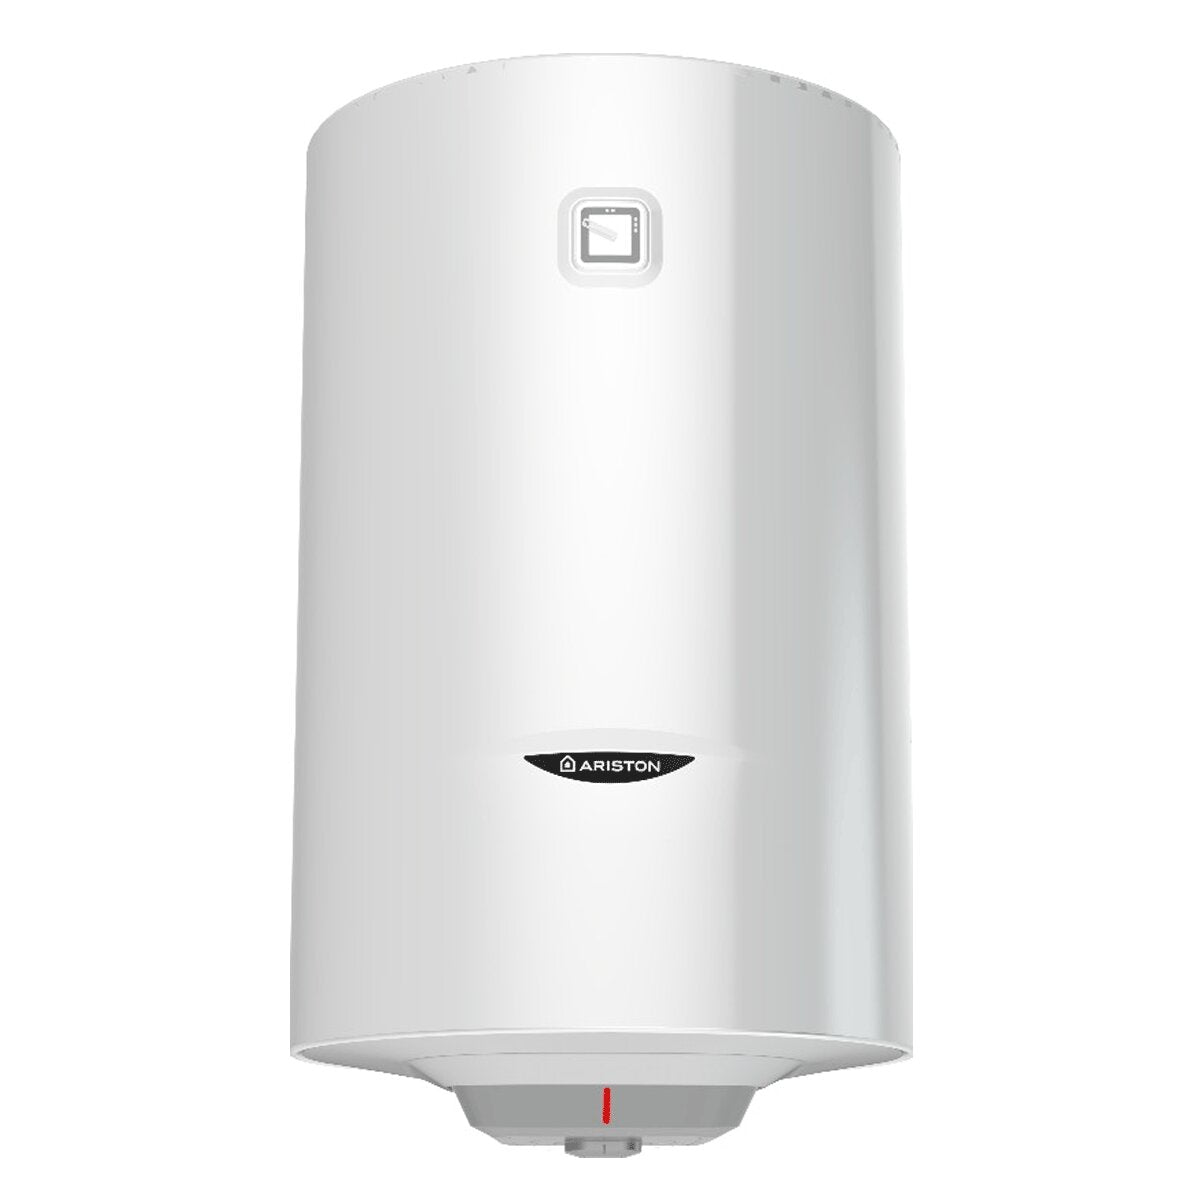 Ariston Pro1 R Thermo Vertical 80 Liter electric water heater with left coil